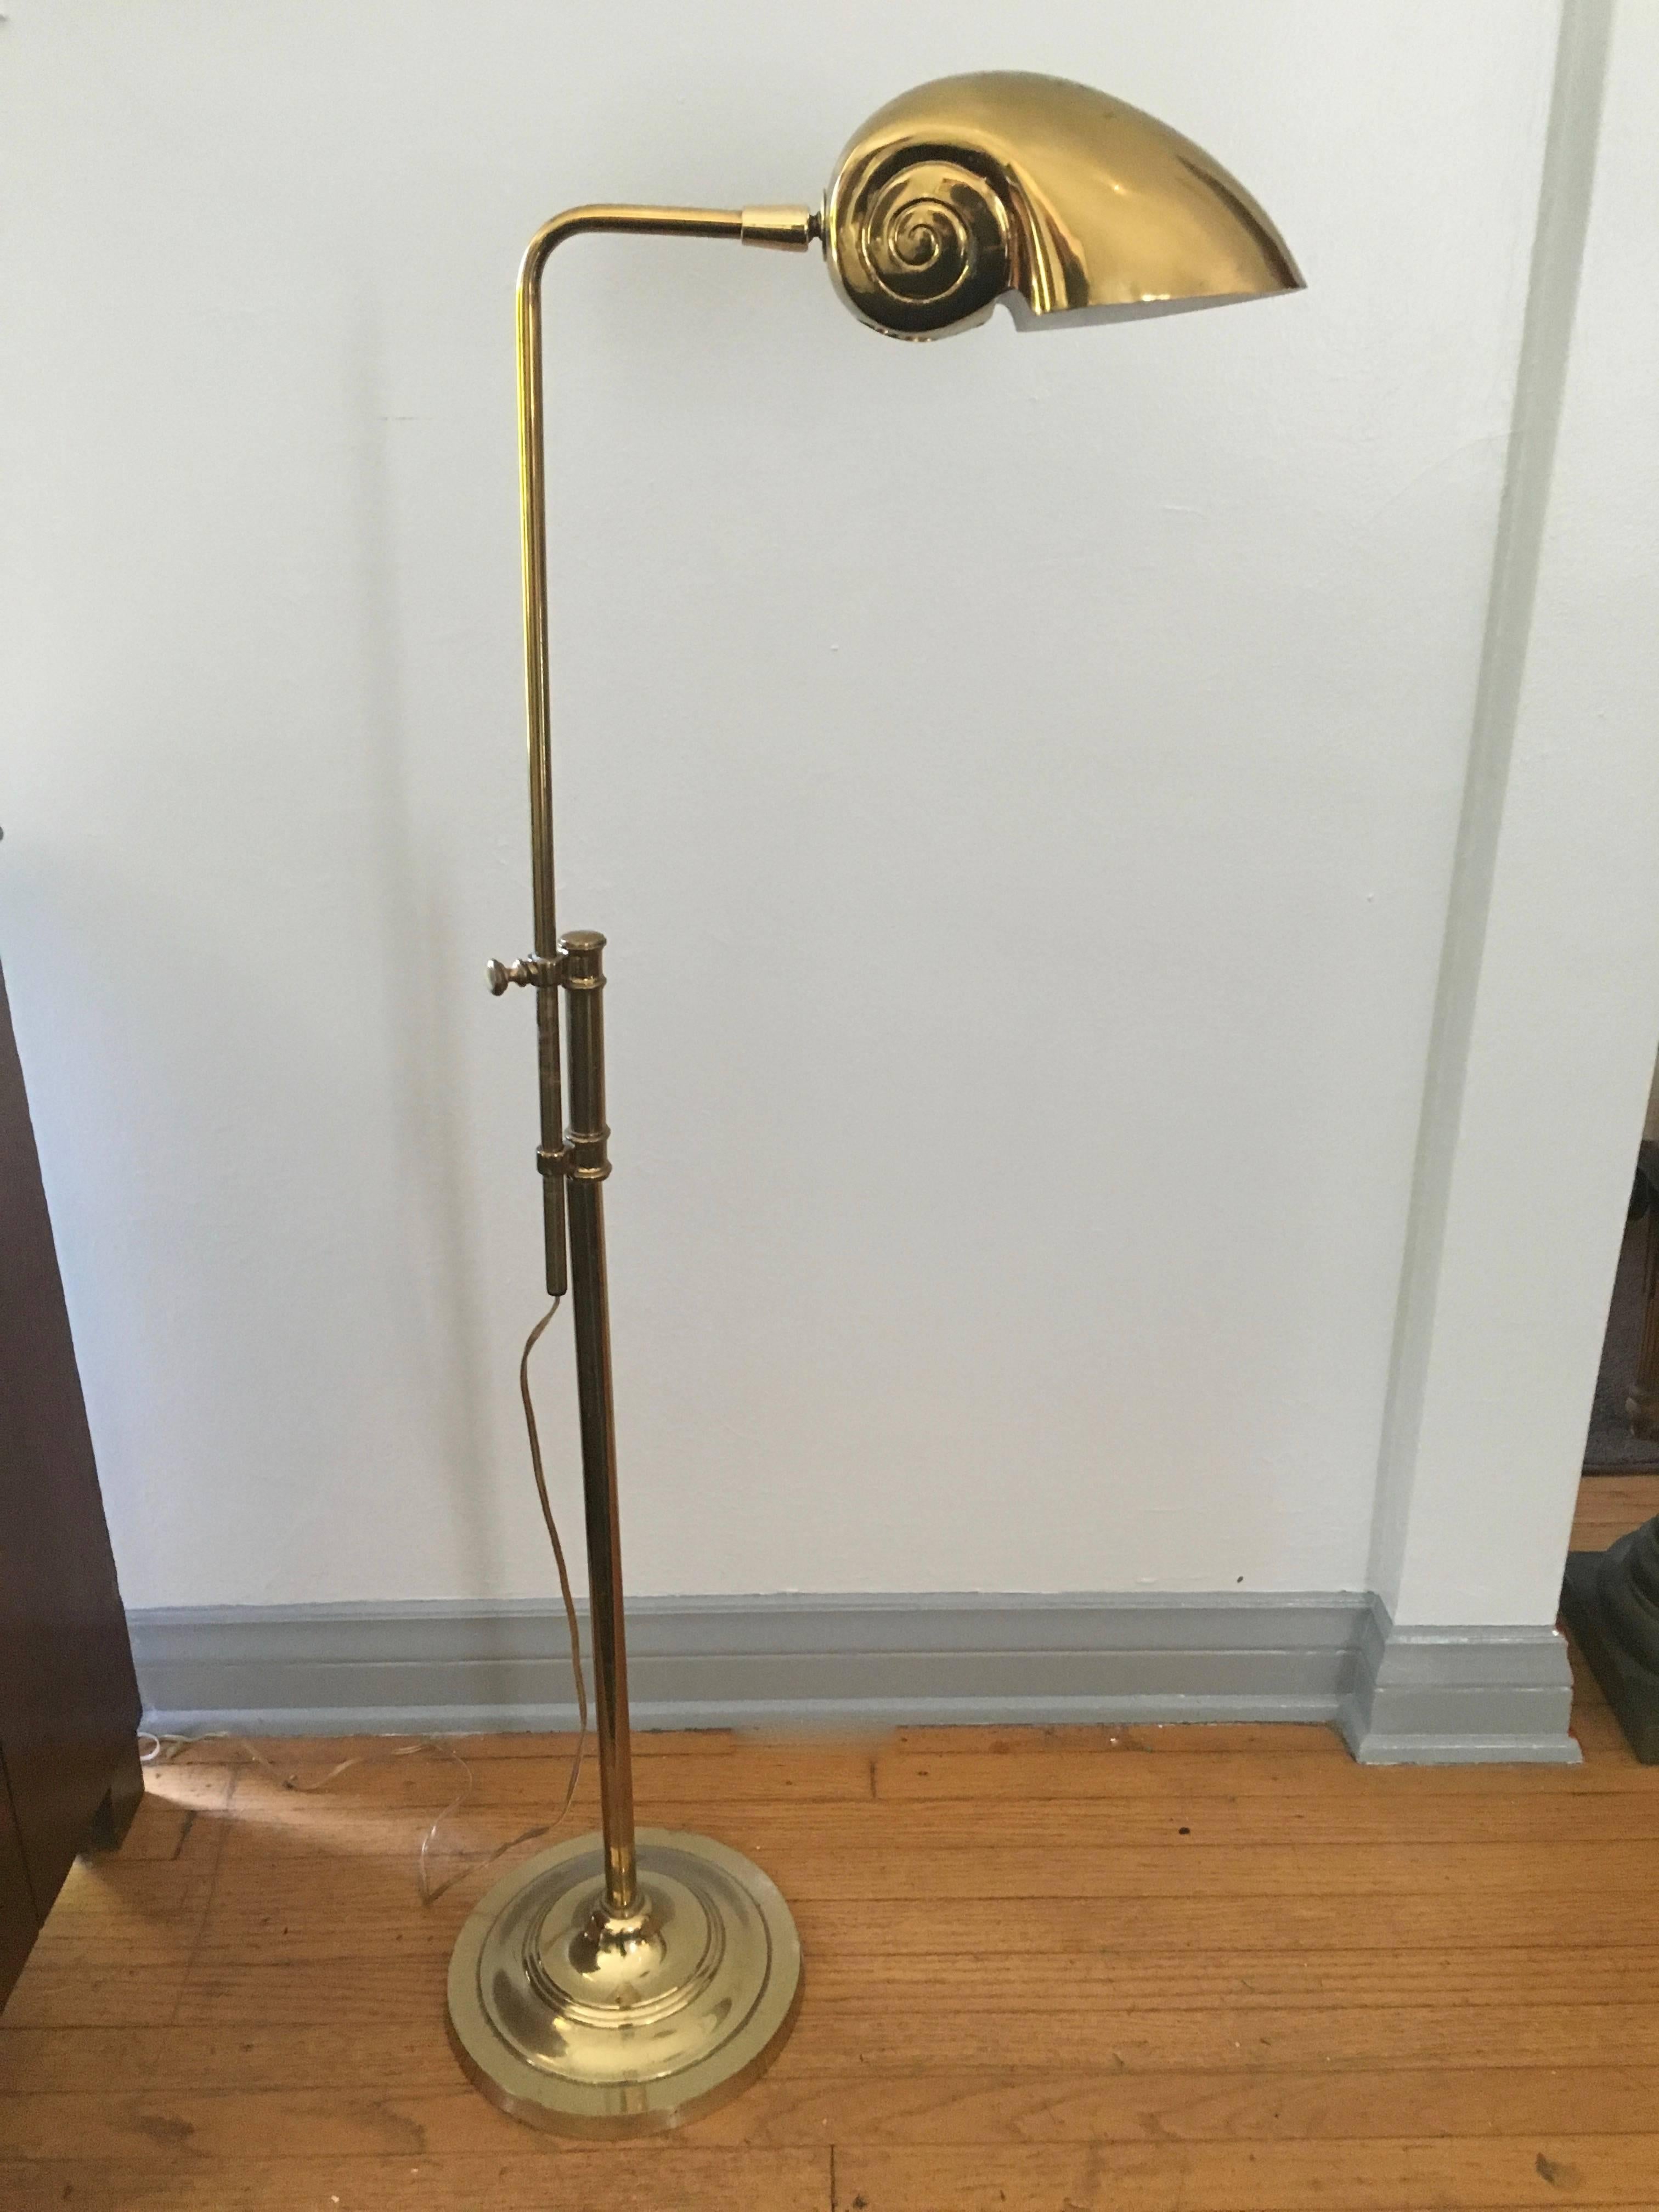 Beautifully design adjustable brass floor lamps with tilt / swivel Nautilus shell shade. A perfect addition to those living by the water or perhaps those who dream of a walk along the shore.

The lamp is adjustable from 33